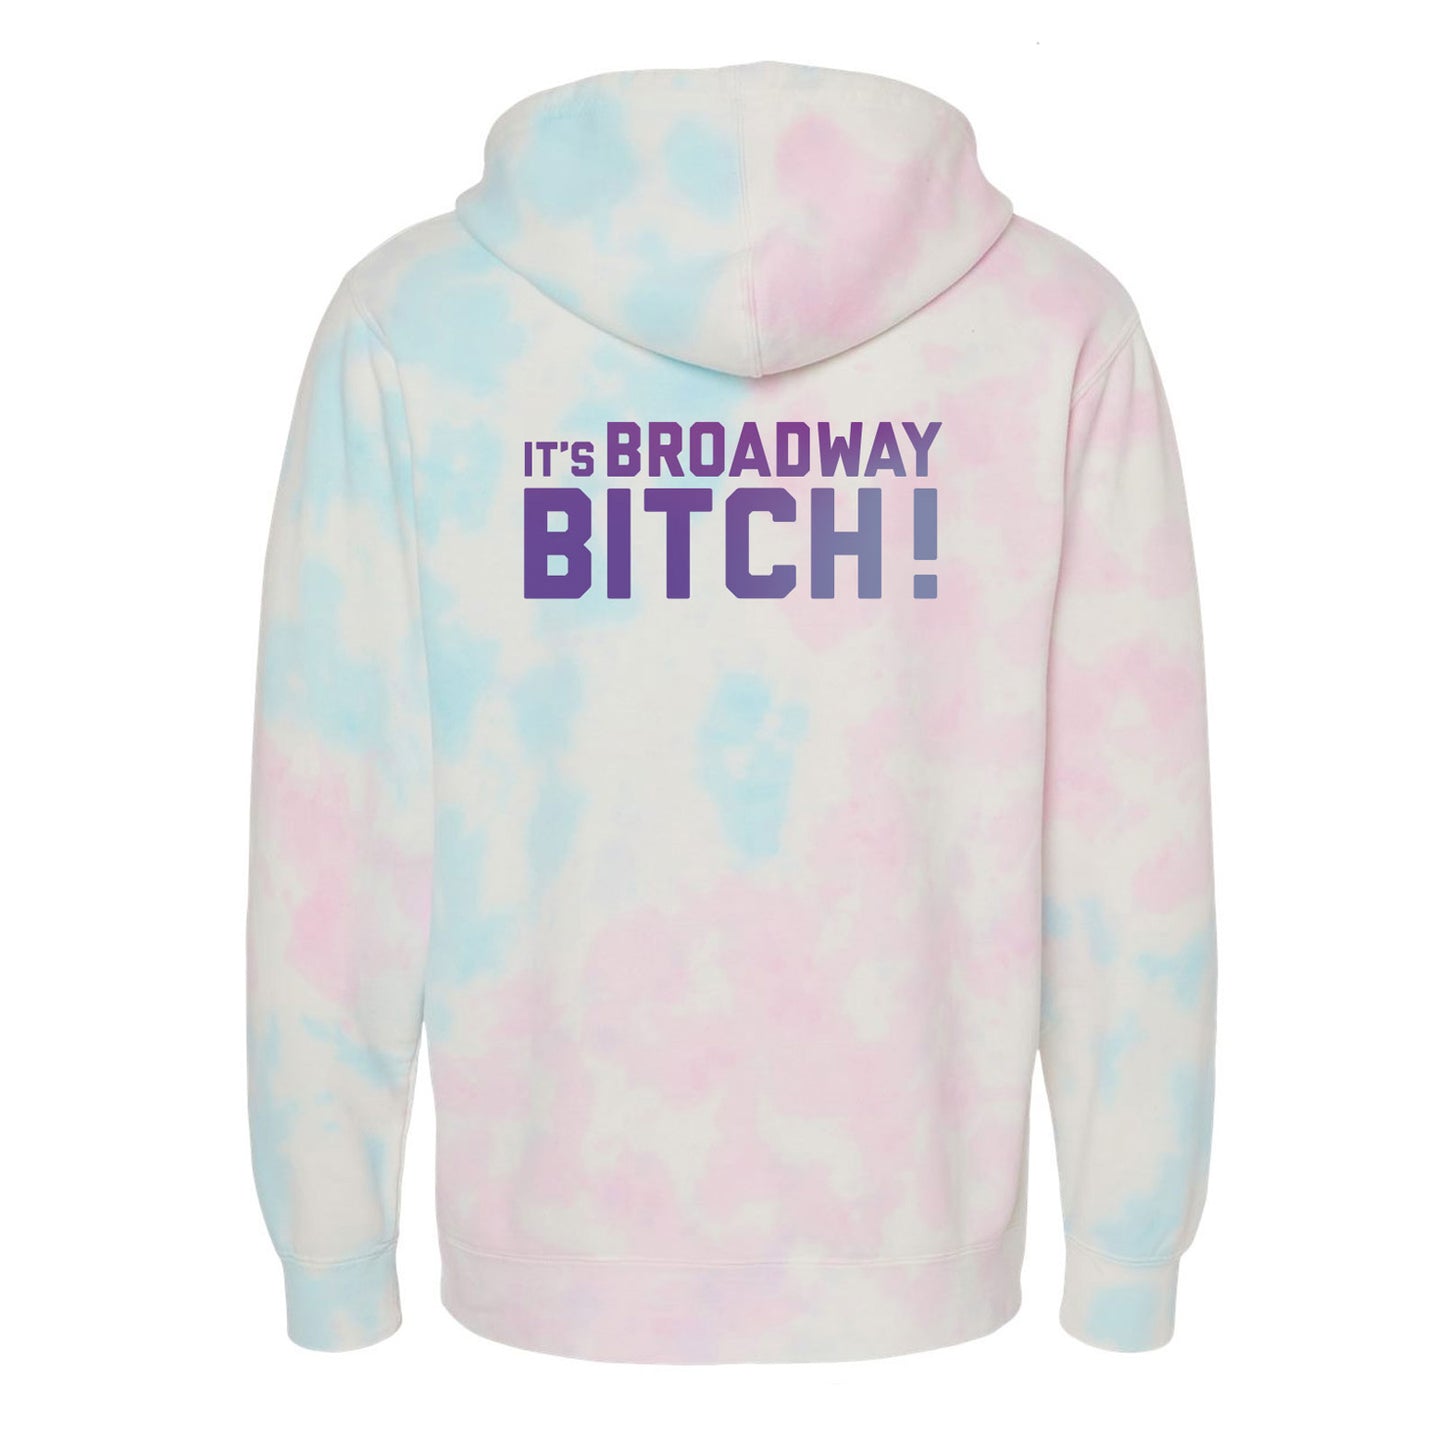 Once Upon A One More Time "It's Broadway Bitch" Tie Dye Pullover